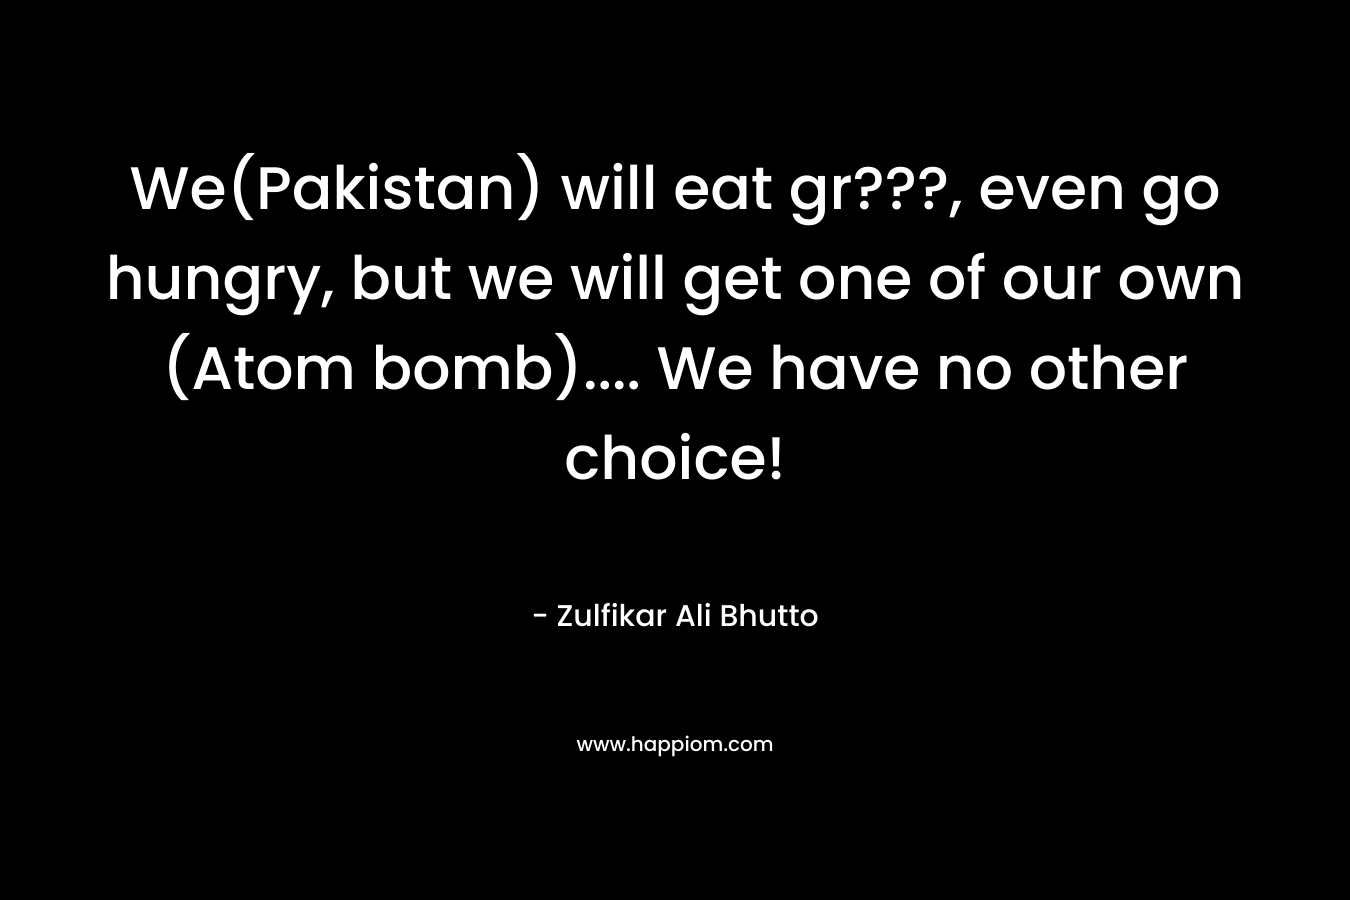 We(Pakistan) will eat gr???, even go hungry, but we will get one of our own (Atom bomb)…. We have no other choice! – Zulfikar Ali Bhutto